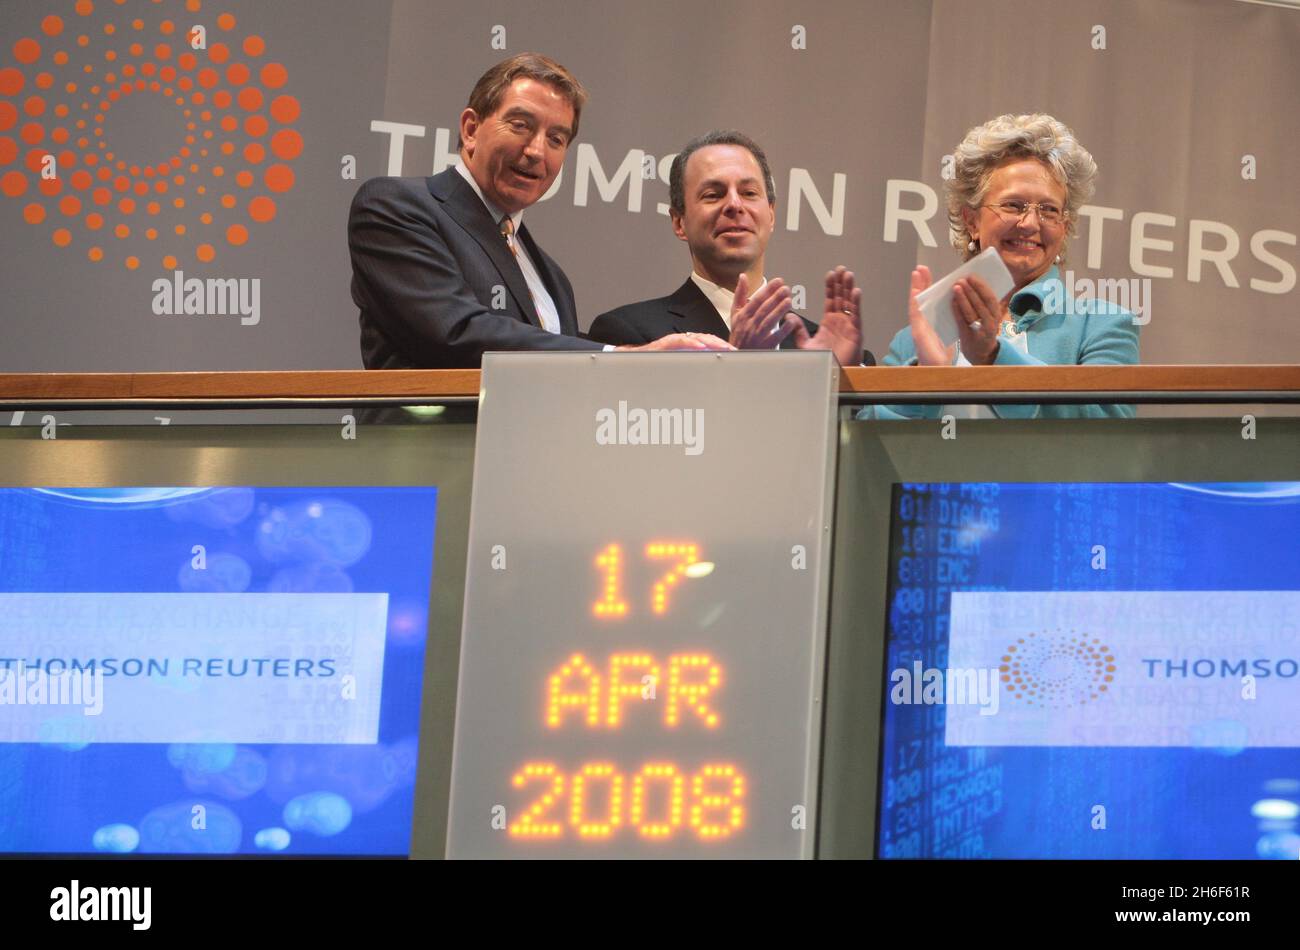 Deputy Chairman of Thomson Reuters, Niall FitzGerald (L), Chief Executive Officer Devin Wenig of Markets Division Thomson Reuters and Chief Executive Officer of the London Stock Exchange Clara Furse, as shares in the newly merged Thomson Reuters information company debuted on the London Stock Exchange this morning. The combined Thomson-Reuters Corp will compete directly with Bloomberg in financial news and information, with each commanding about a third of the market. Thomson Reuters has more than 50,000 employees with operations in 93 countries. Stock Photo